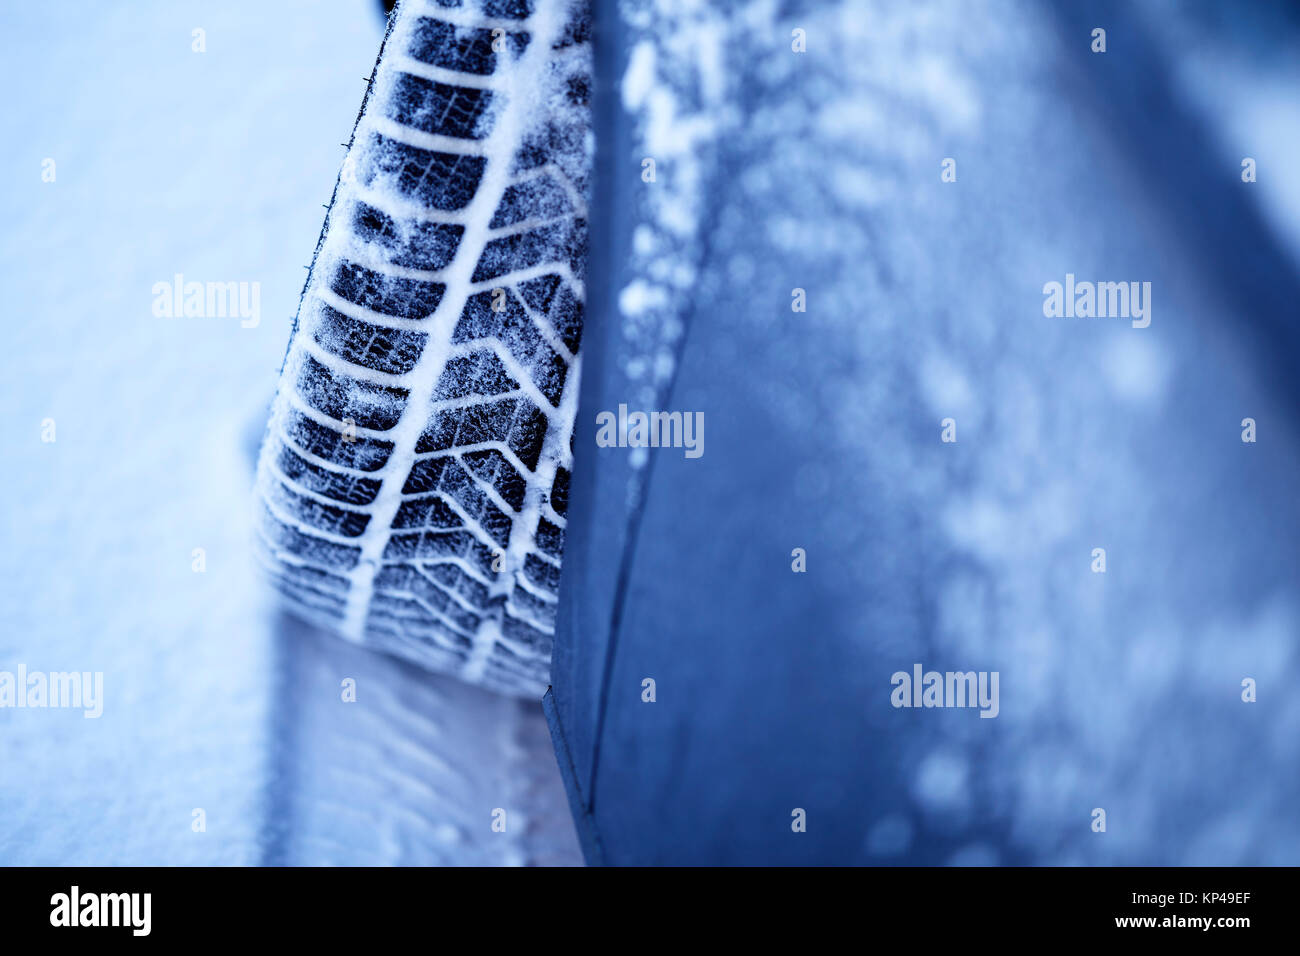 Winter Tyres fitted in Snow Conditions Stock Photo